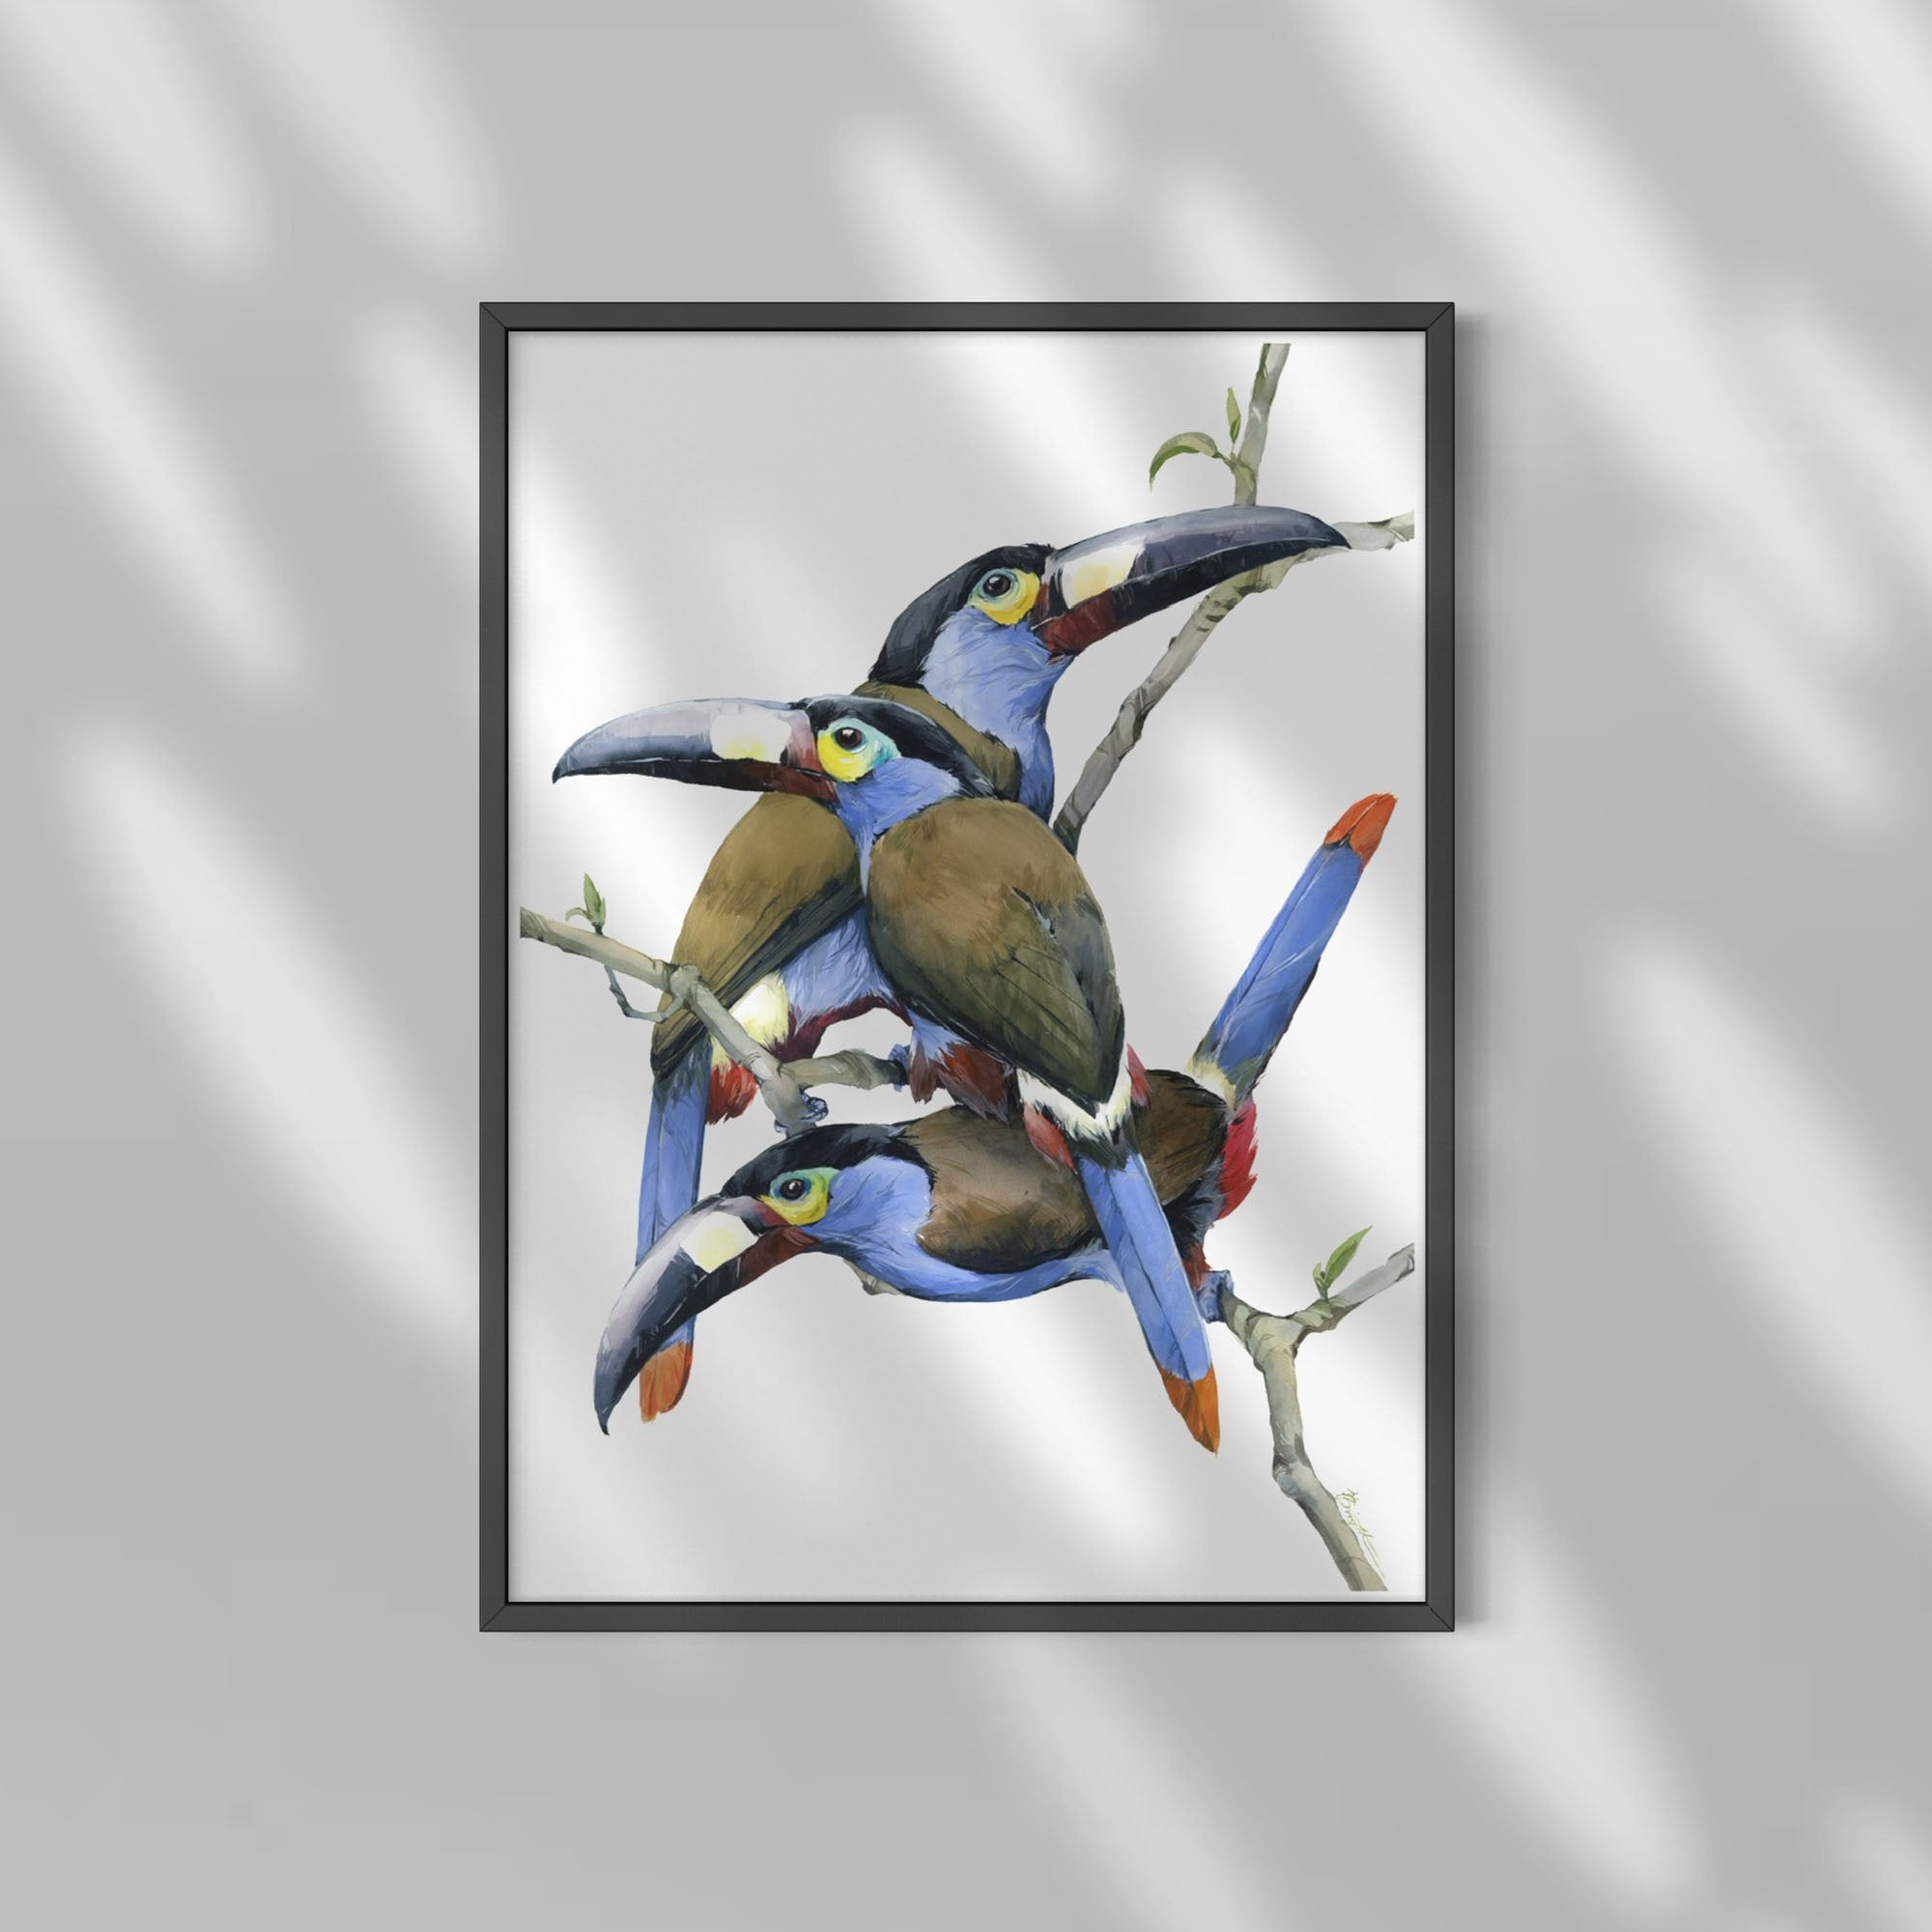 Plate-billed mountain toucans - original painting